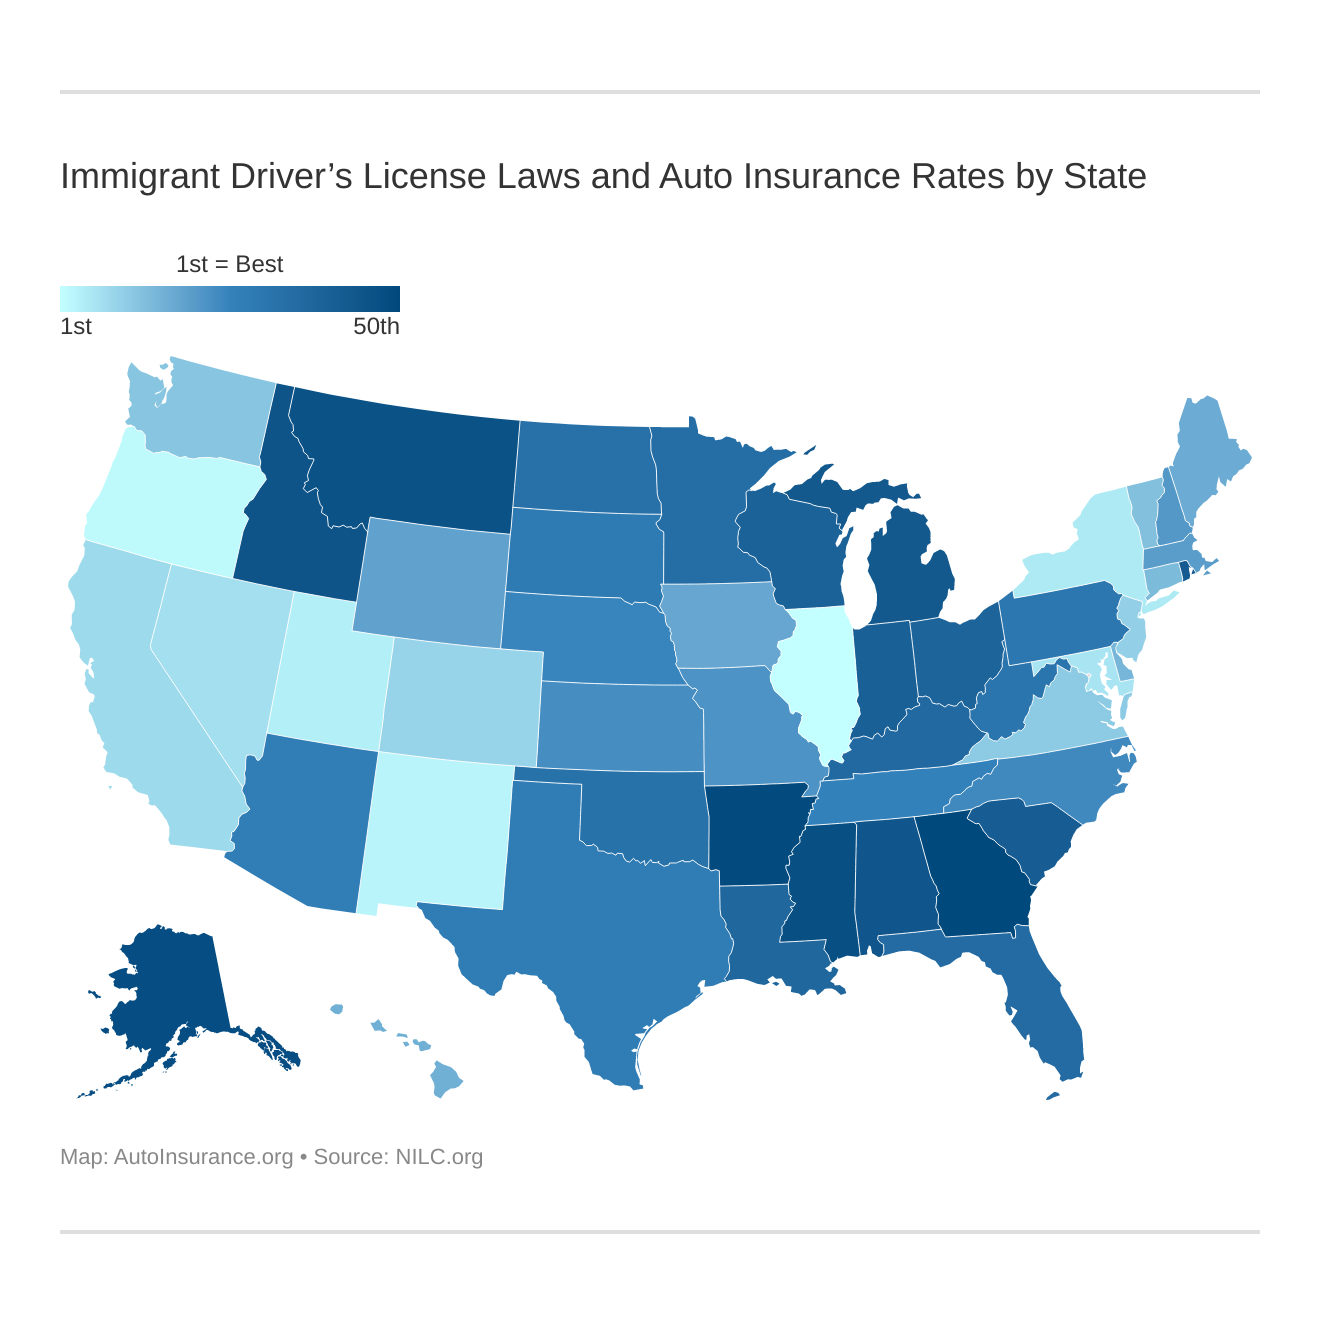 Immigrant Driver’s License Laws and Auto Insurance Rates by State